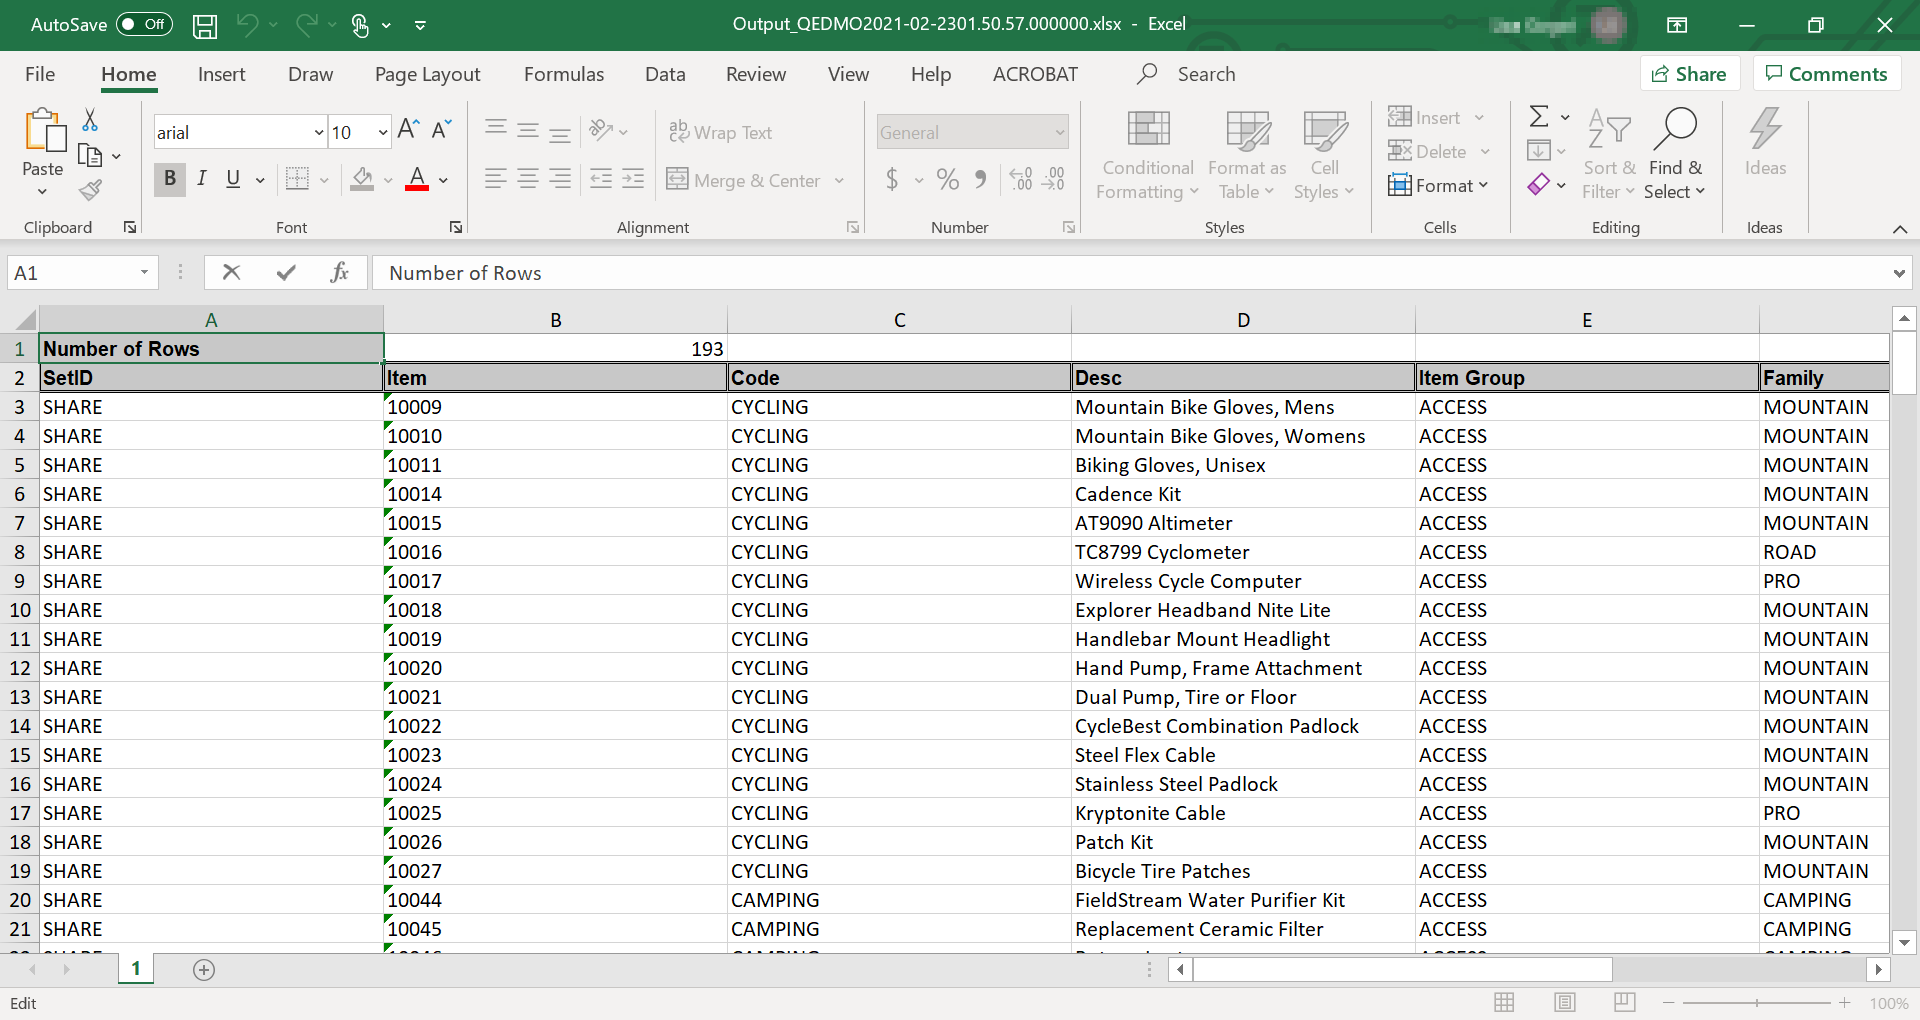 Exporting Filtered Data - Excel